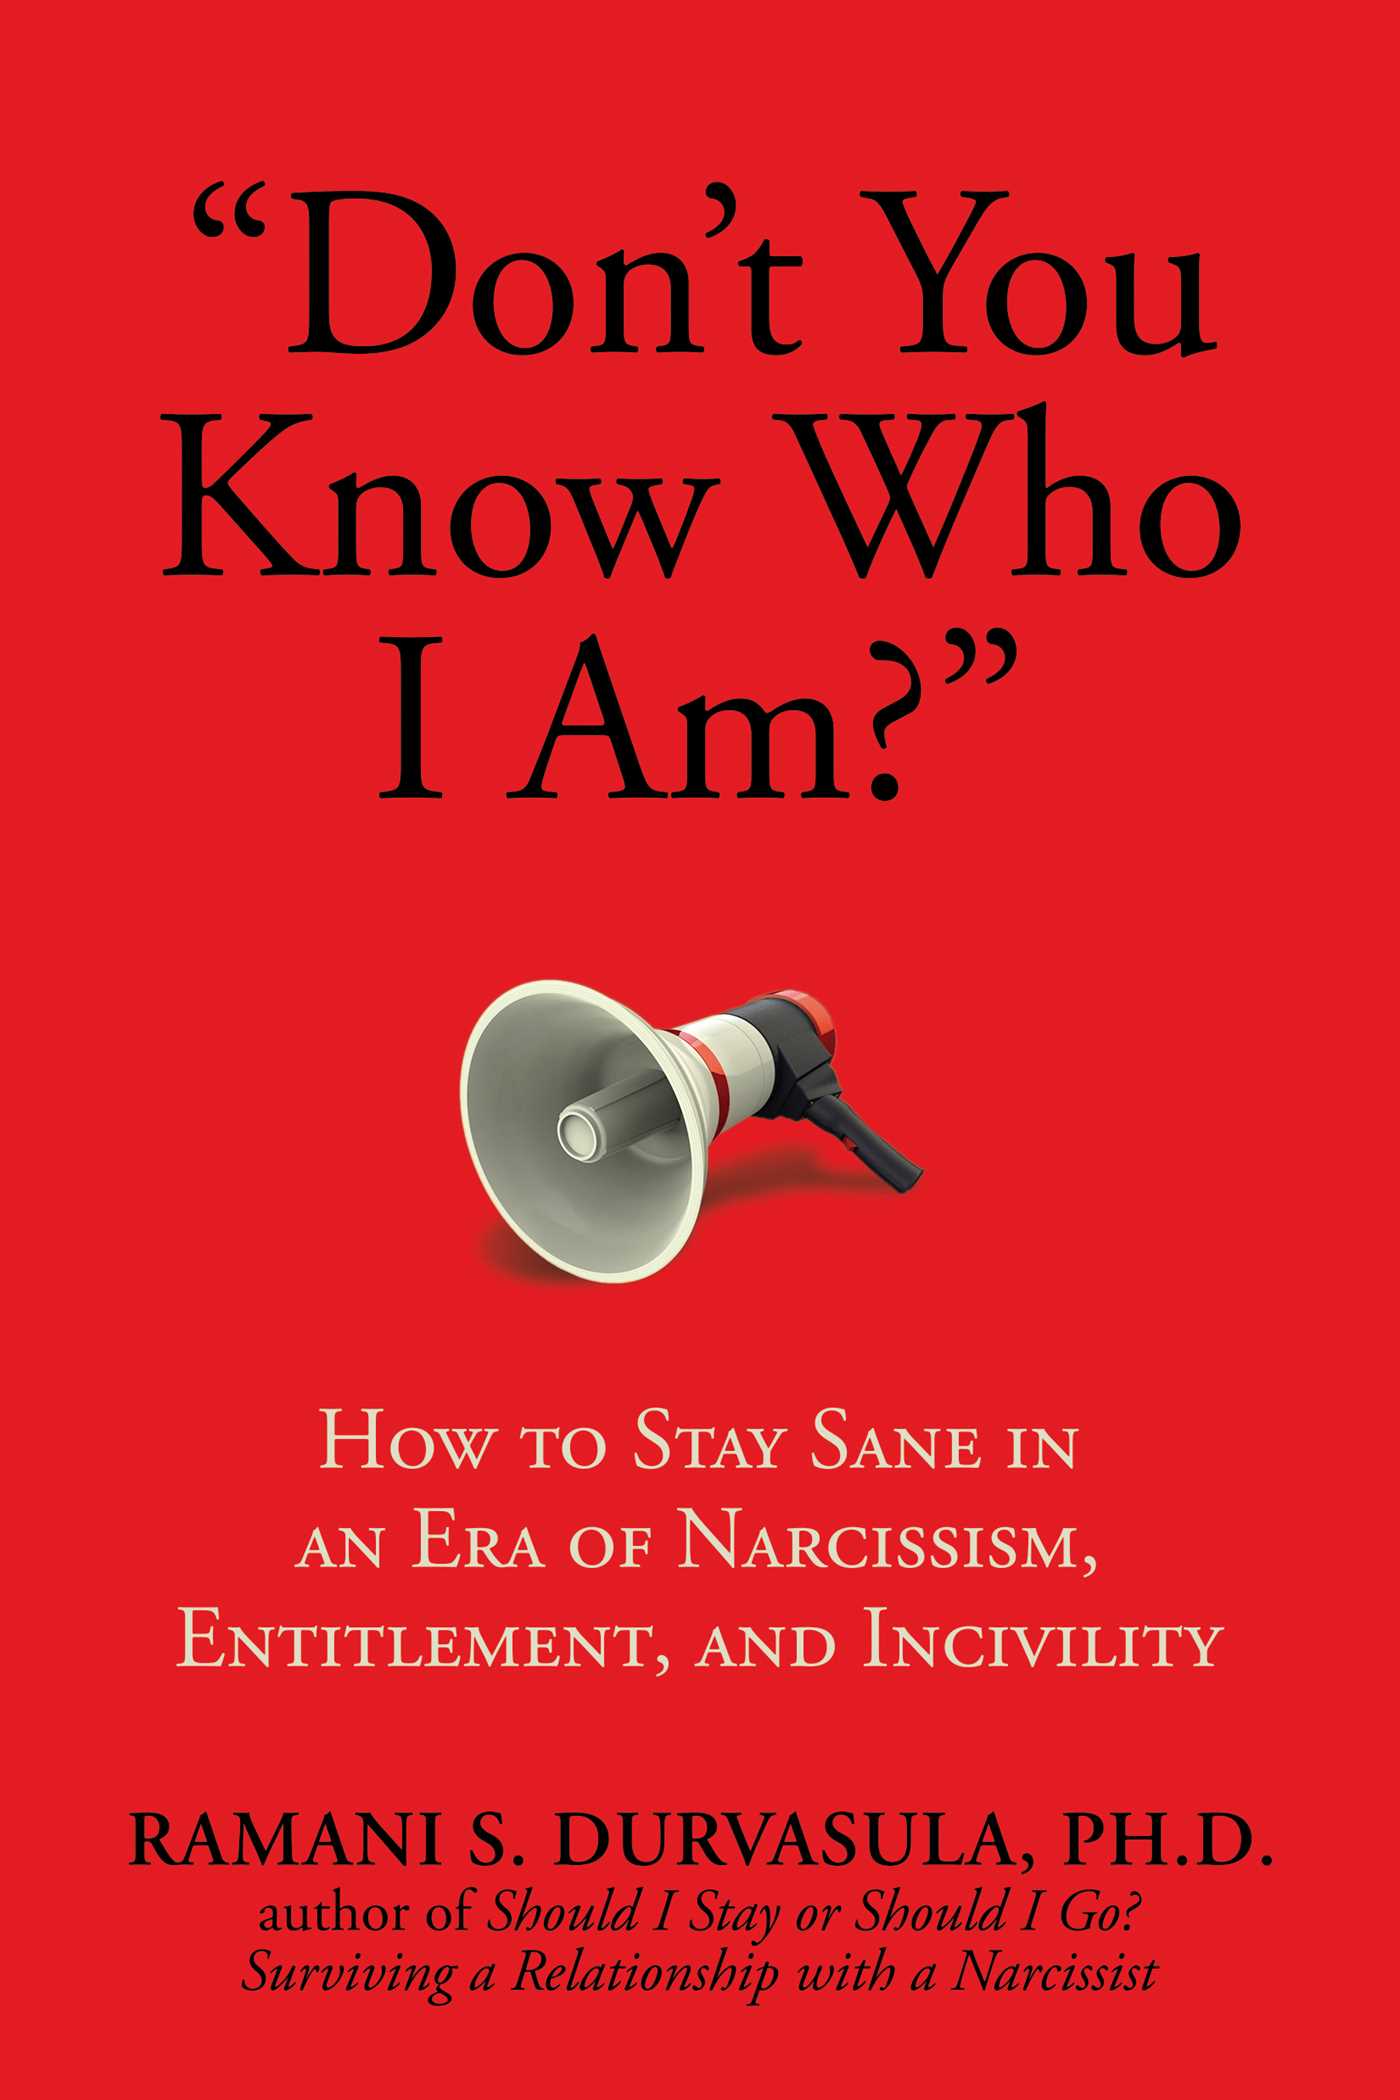 "Don't You Know Who I Am?" : How to Stay Sane in an Era of Narcissism, Entitlement, and Incivility | Durvasula, Ph.D, Ramani S.